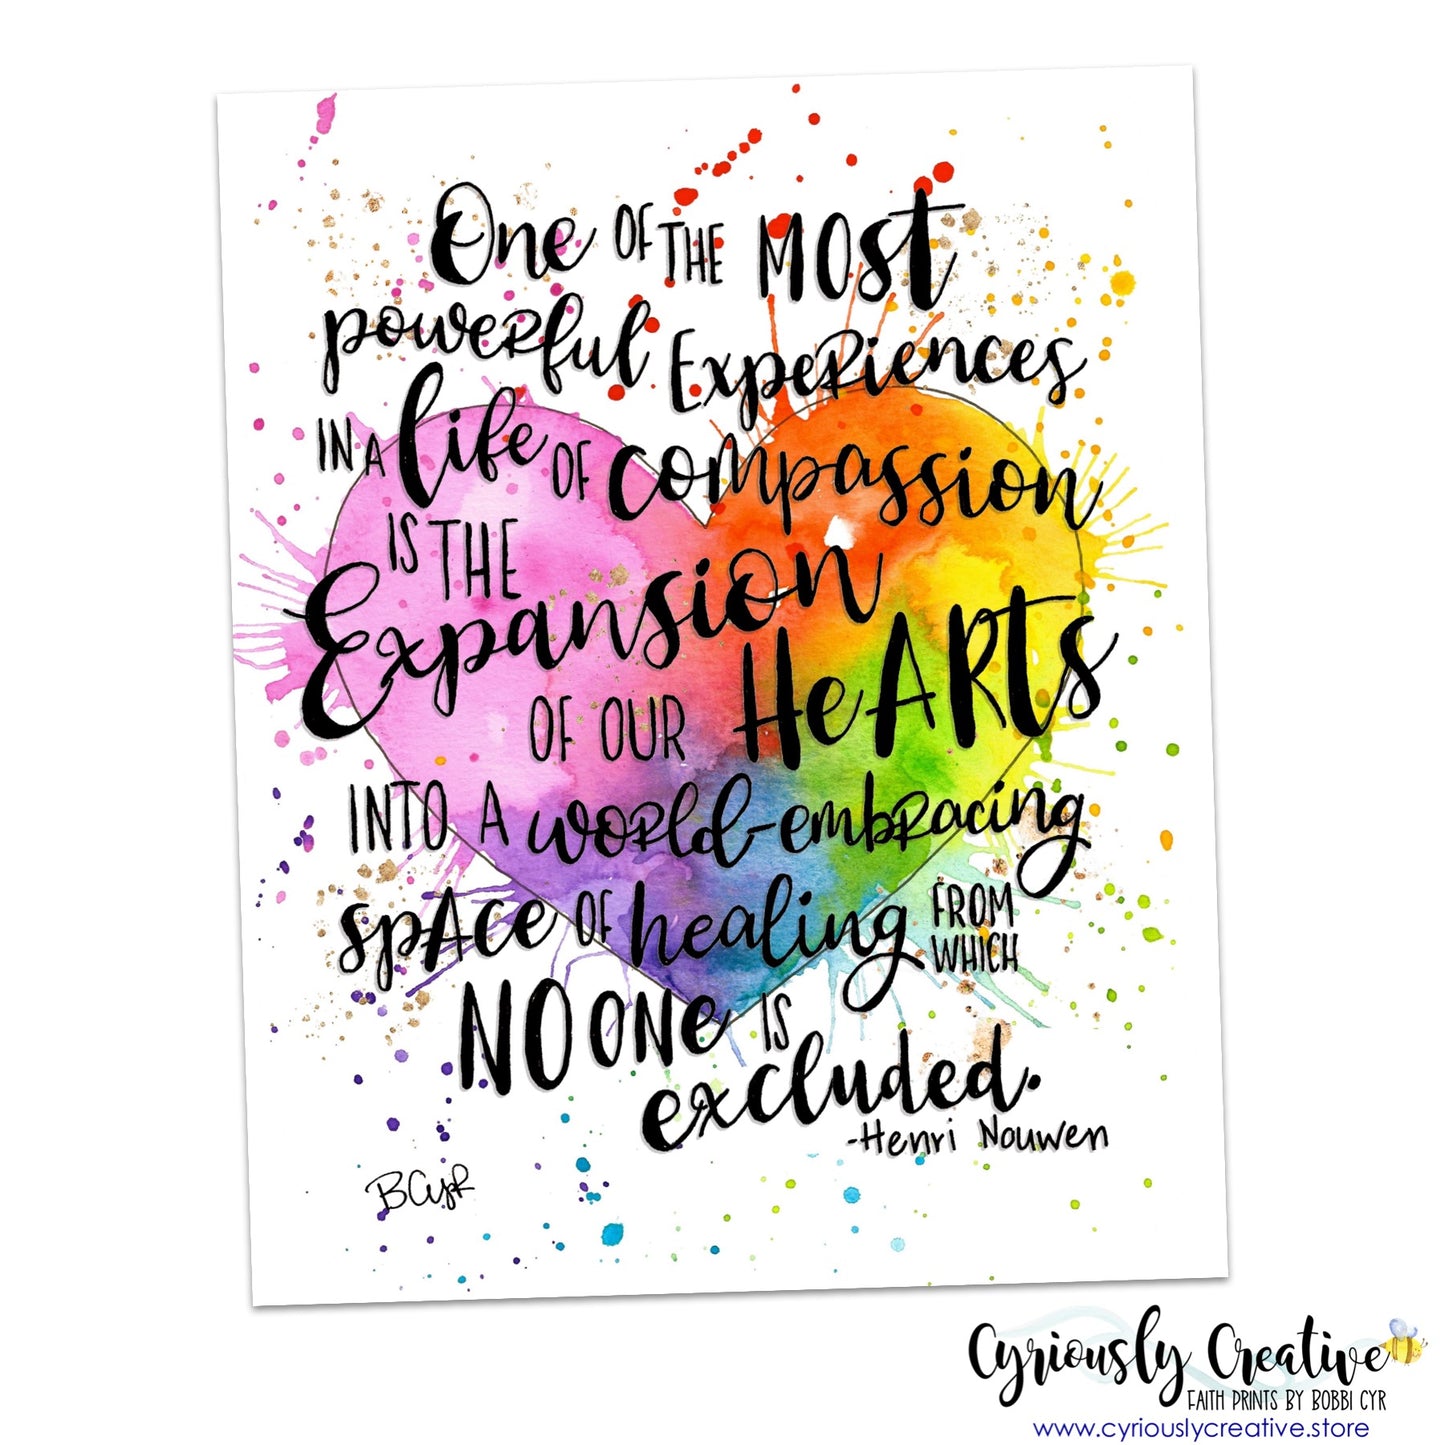 Expansion of our Hearts (full Quote)